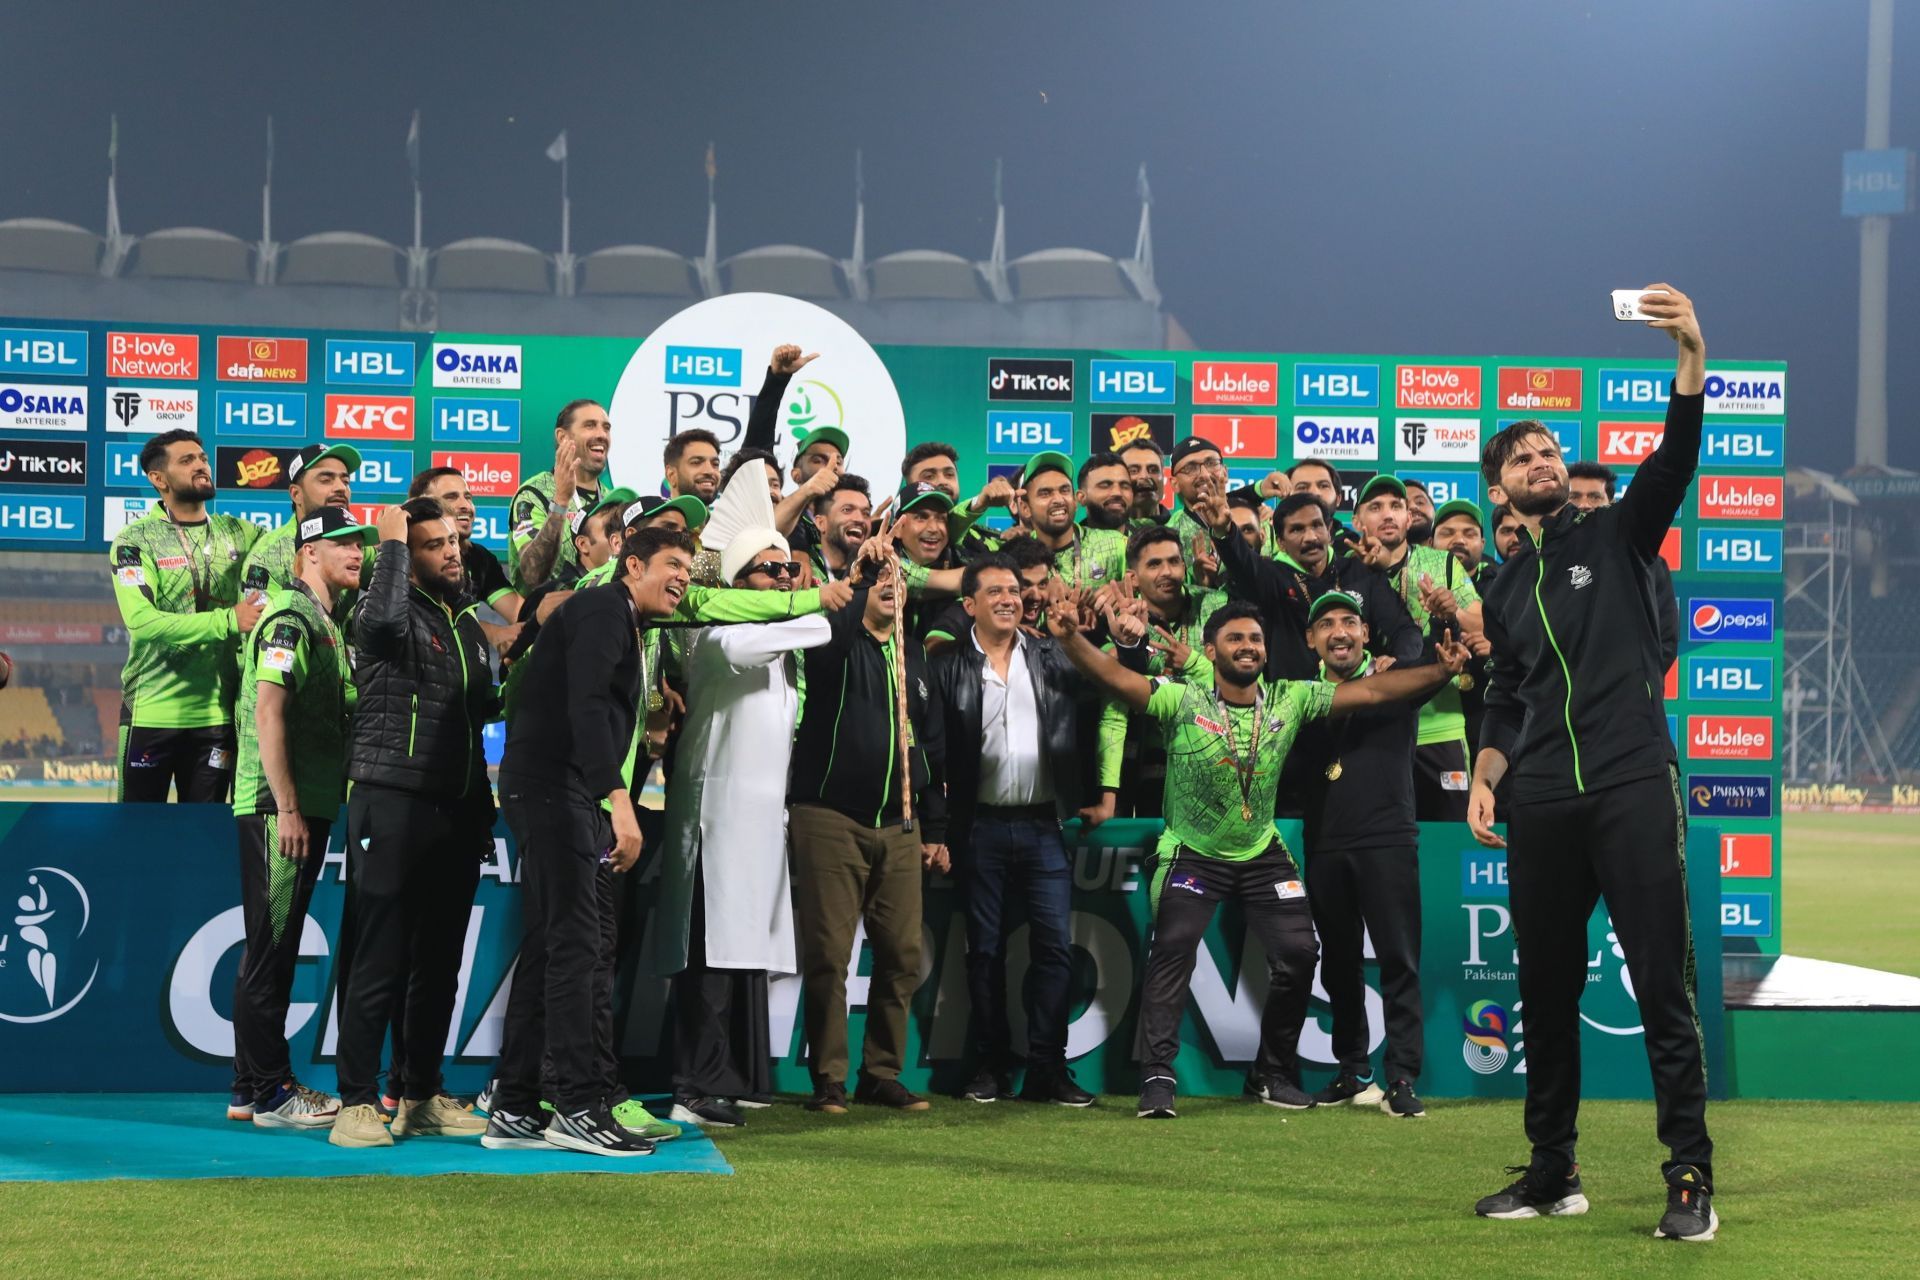 Shaheen Shah Afridi led his team to the title [PSL on Twitter]